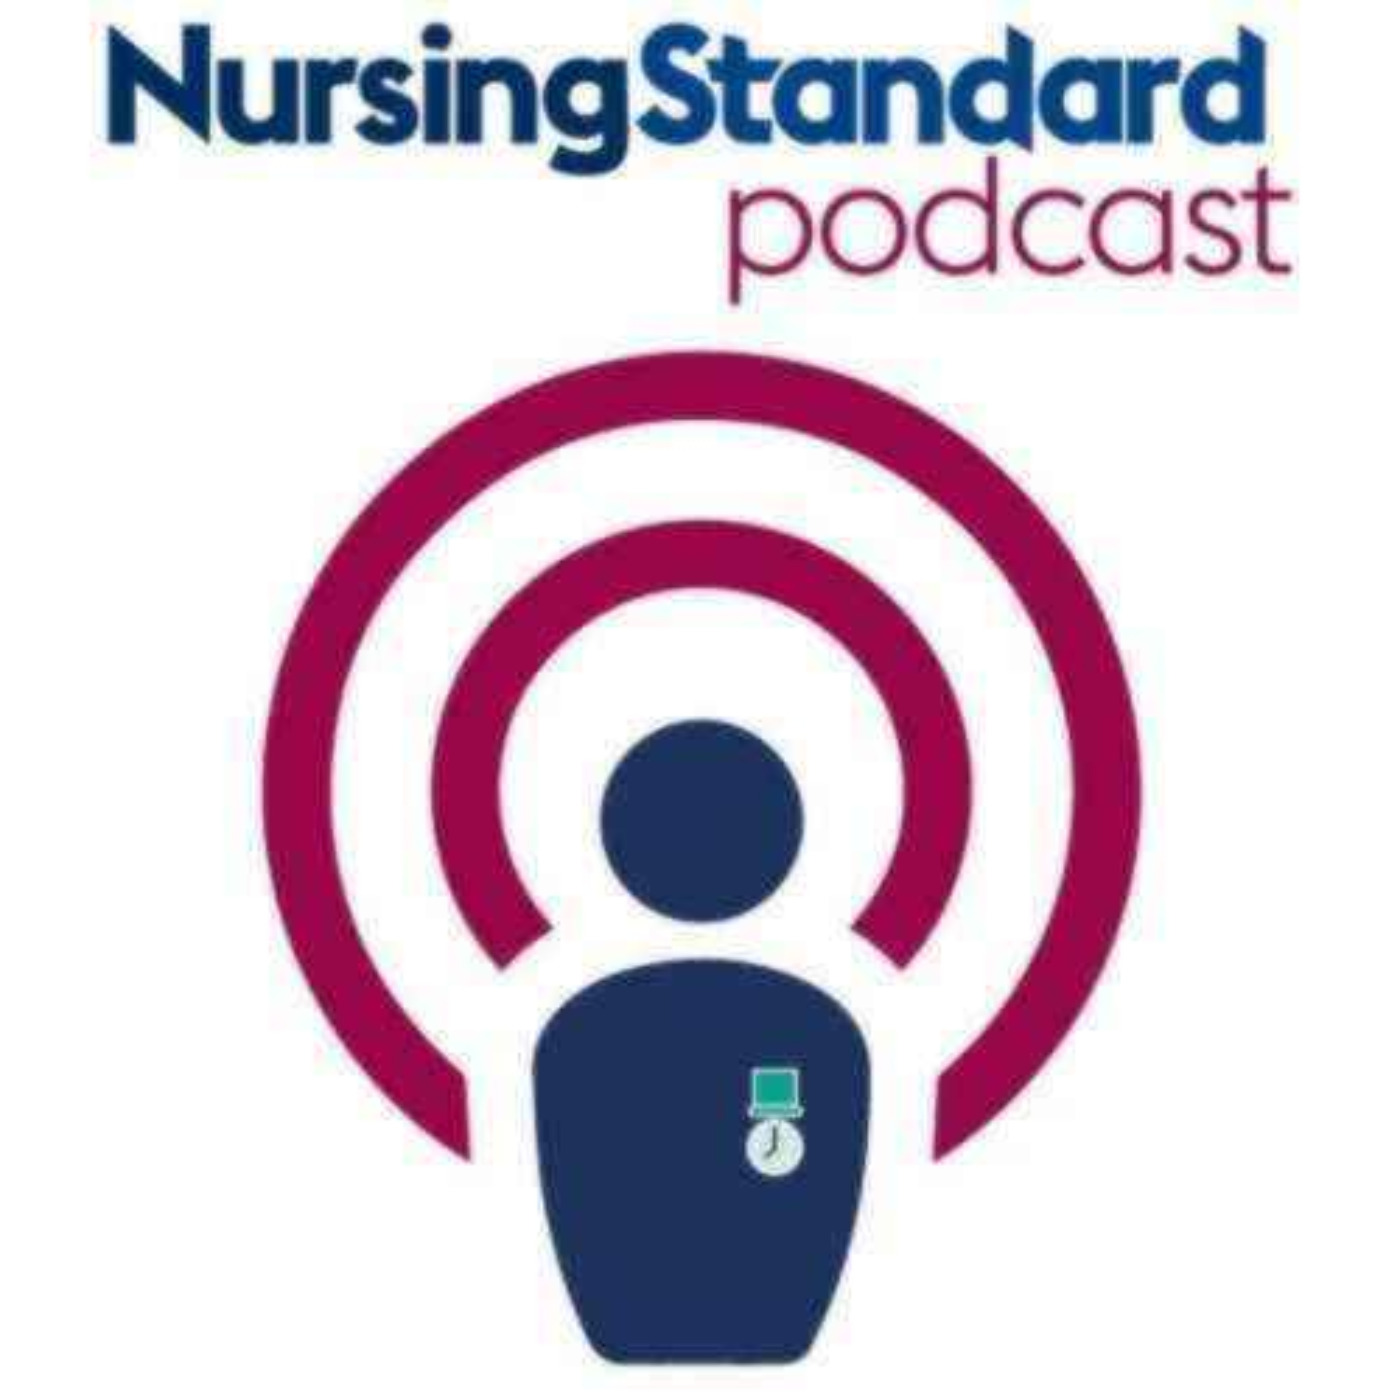 Raising concerns: challenges nurses face when speaking out